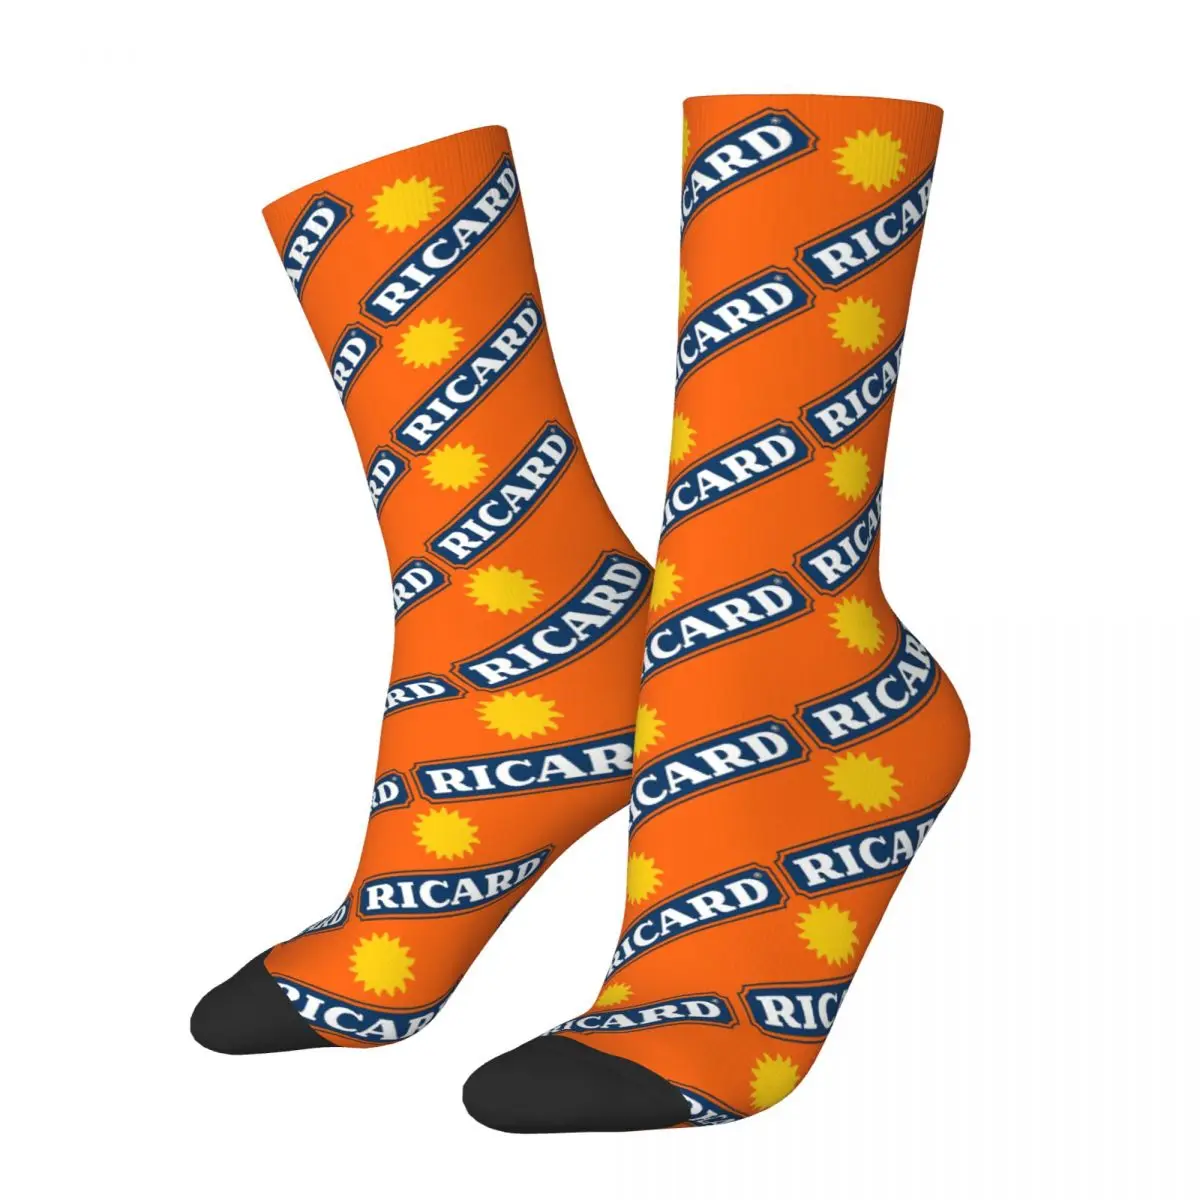 Ricard The Duckling, Ricards Who Was Now Men Women Socks Leisure Beautiful Spring, Summer, Autumn, and Winter Dressing Gifts